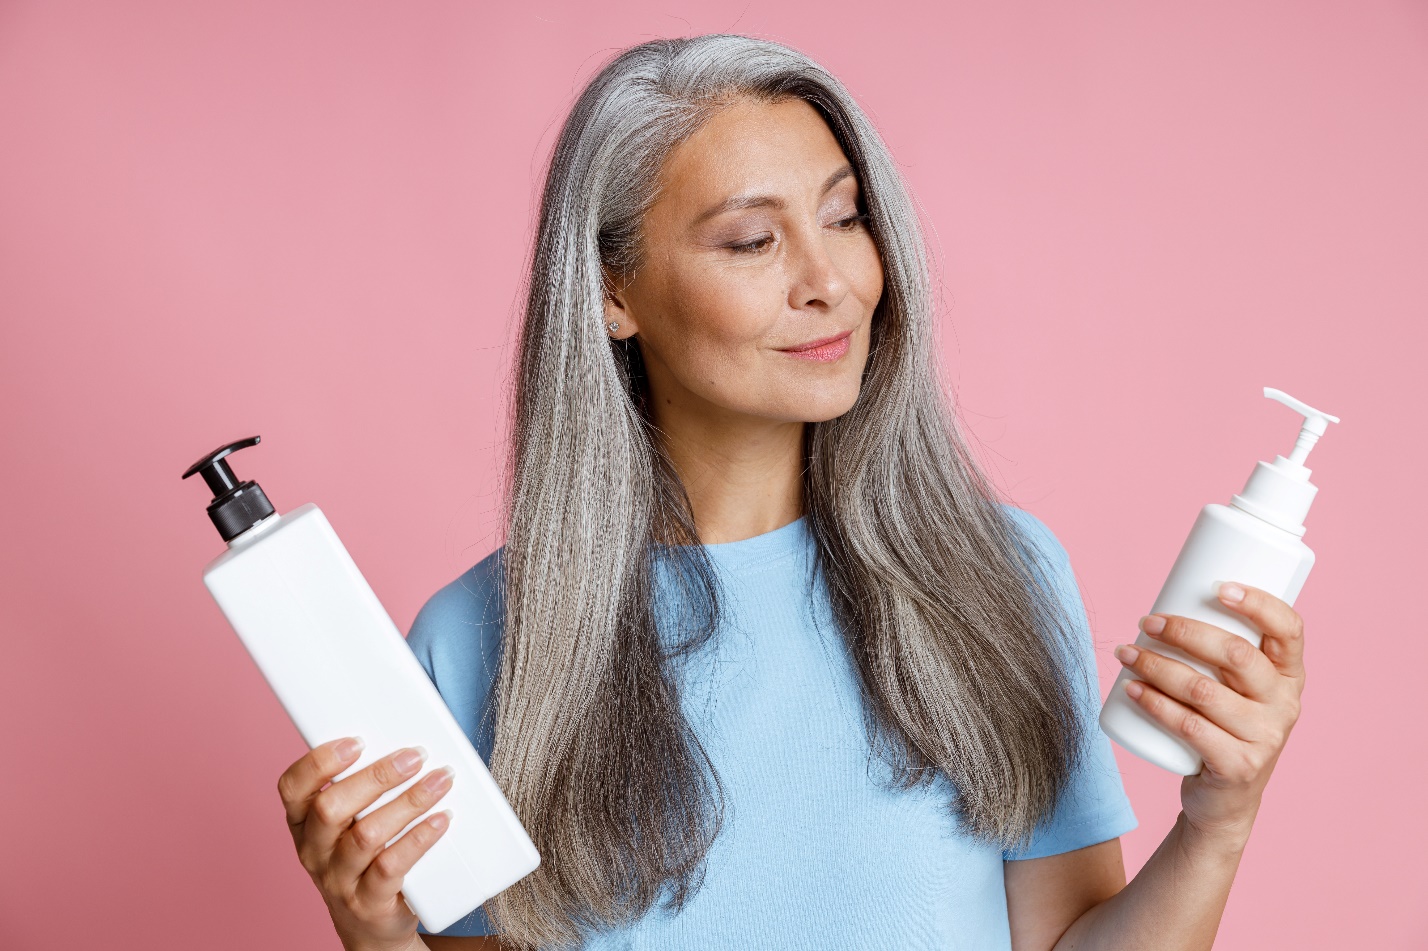 Senior woman with long grey hair holding two bottles of shampoos